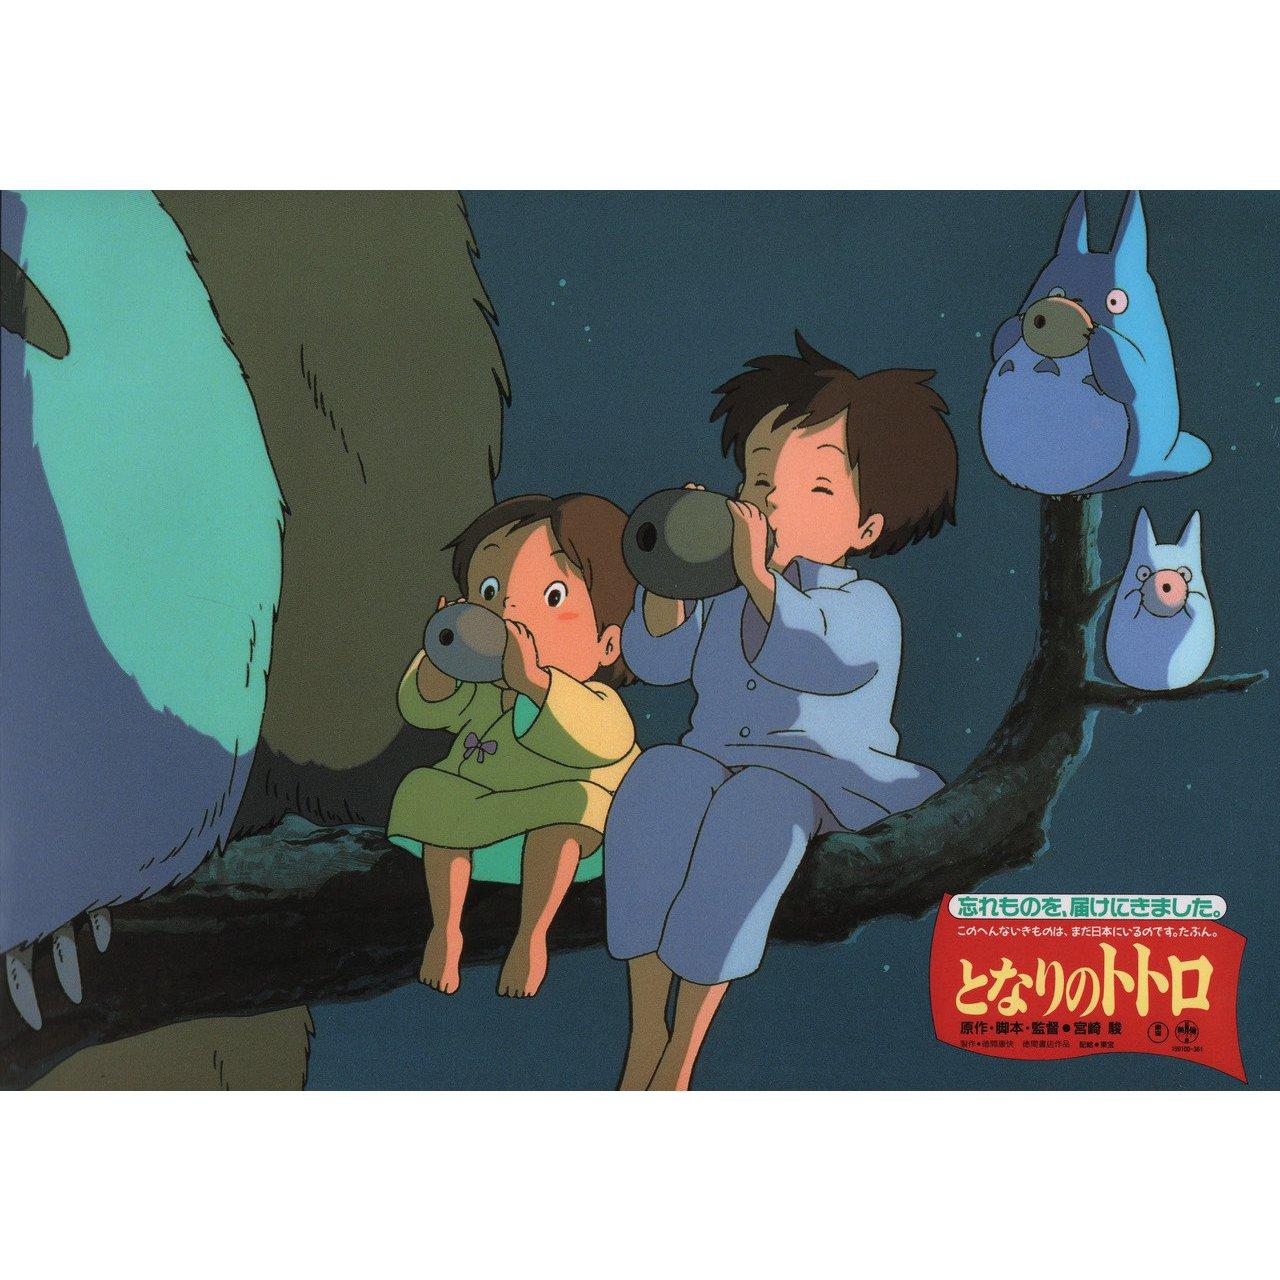 Original 1988 Japanese scene card for the film 'My Neighbor Totoro' (Tonari no Totoro) directed by Hayao Miyazaki with Toshiyuki Amagasa / Paul Butcher / Pat Carroll / Cheryl Chase. Fine condition. Please note: the size is stated in inches and the